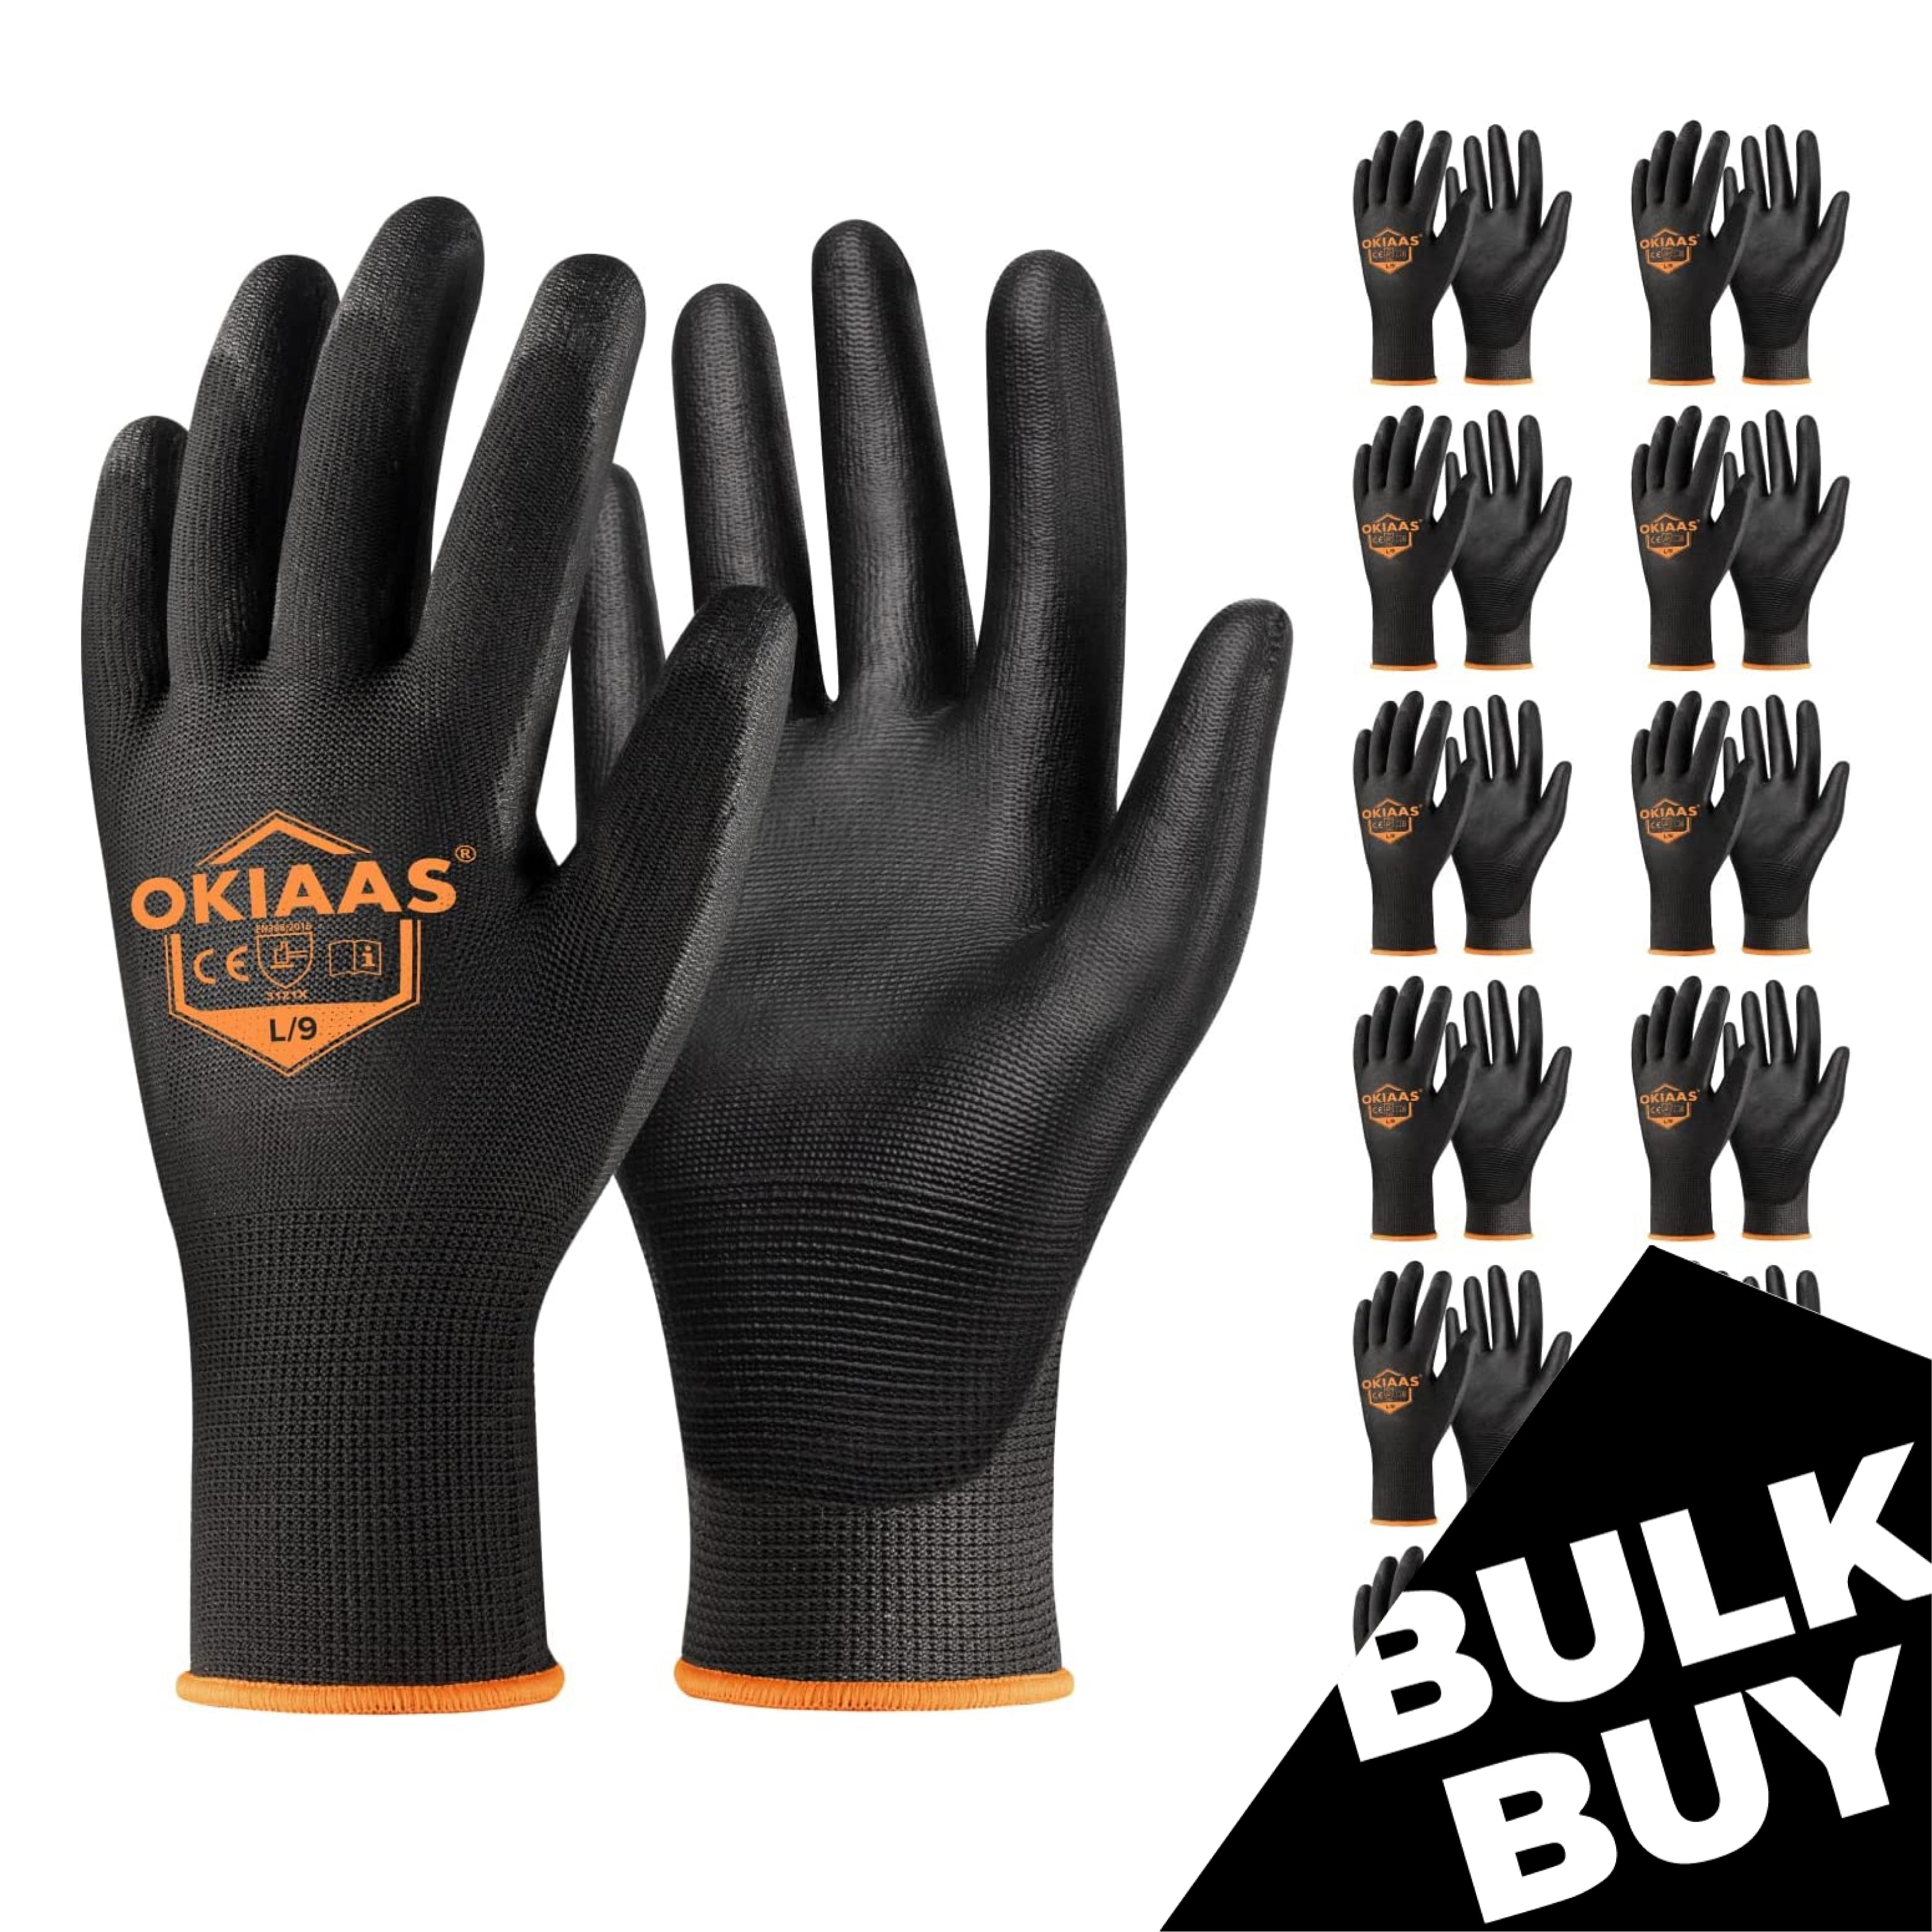 Large High Dexterity Cut 3 Resistant Polyurethane Dipped Work Gloves